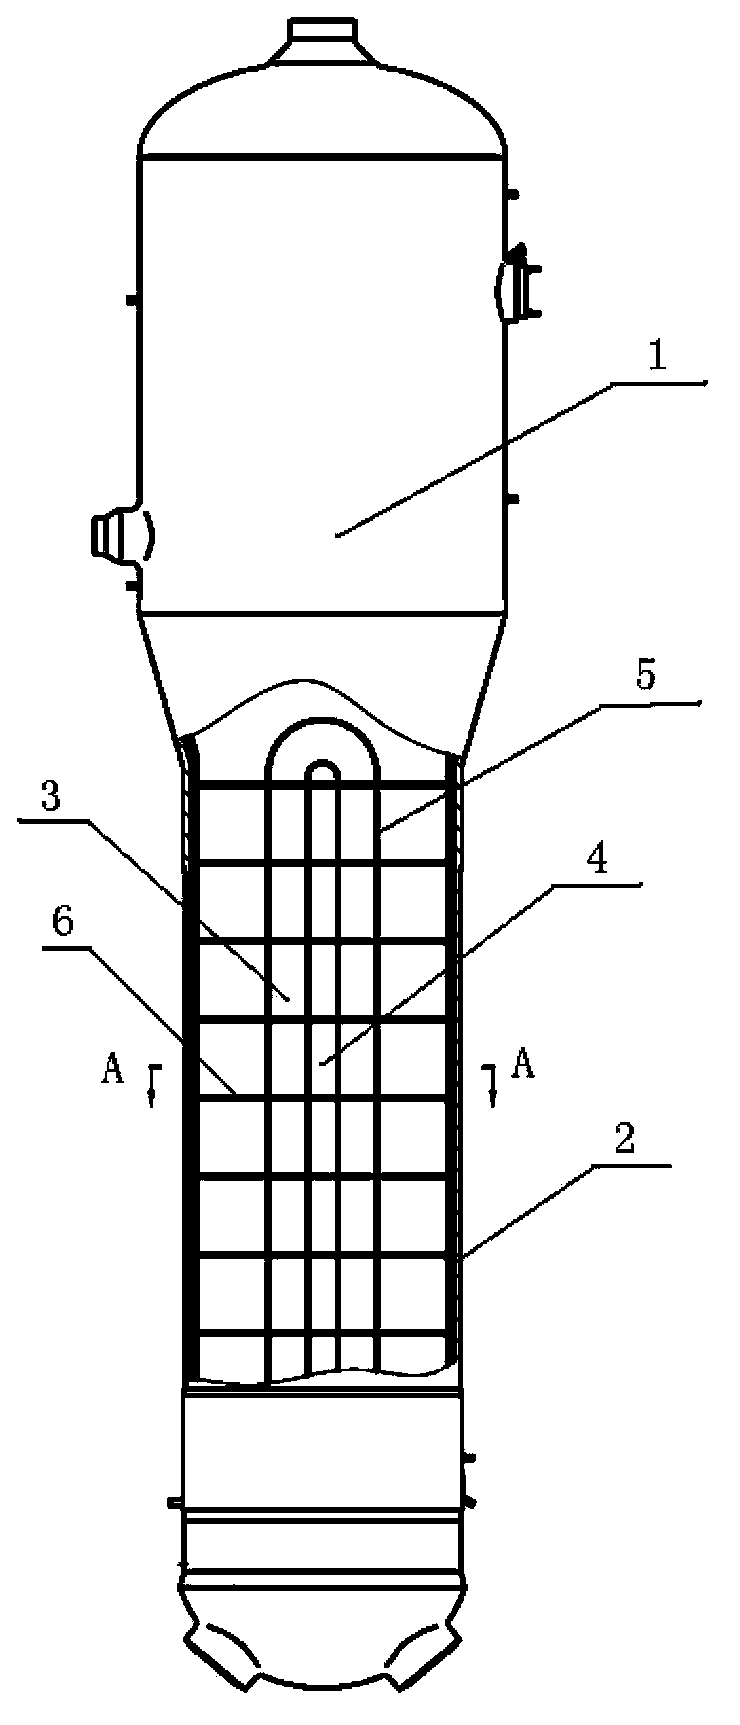 Novel supporting device for steam generator heat exchange tubes of pressurized water reactor nuclear power plant